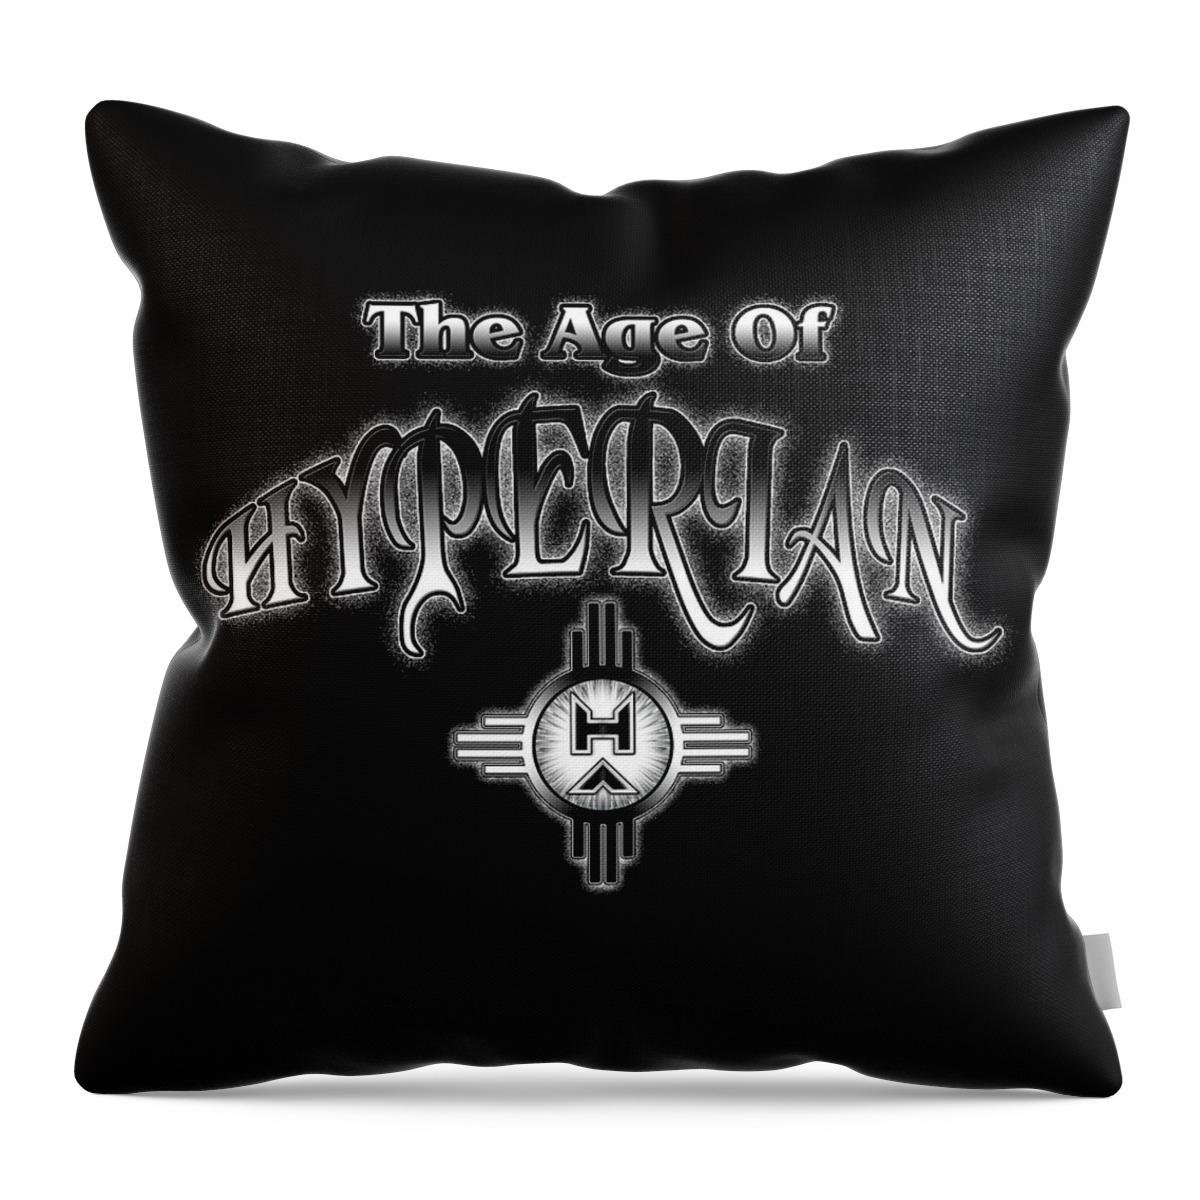 Typography Throw Pillow featuring the digital art The Age Of Hyperian ESM by Rolando Burbon